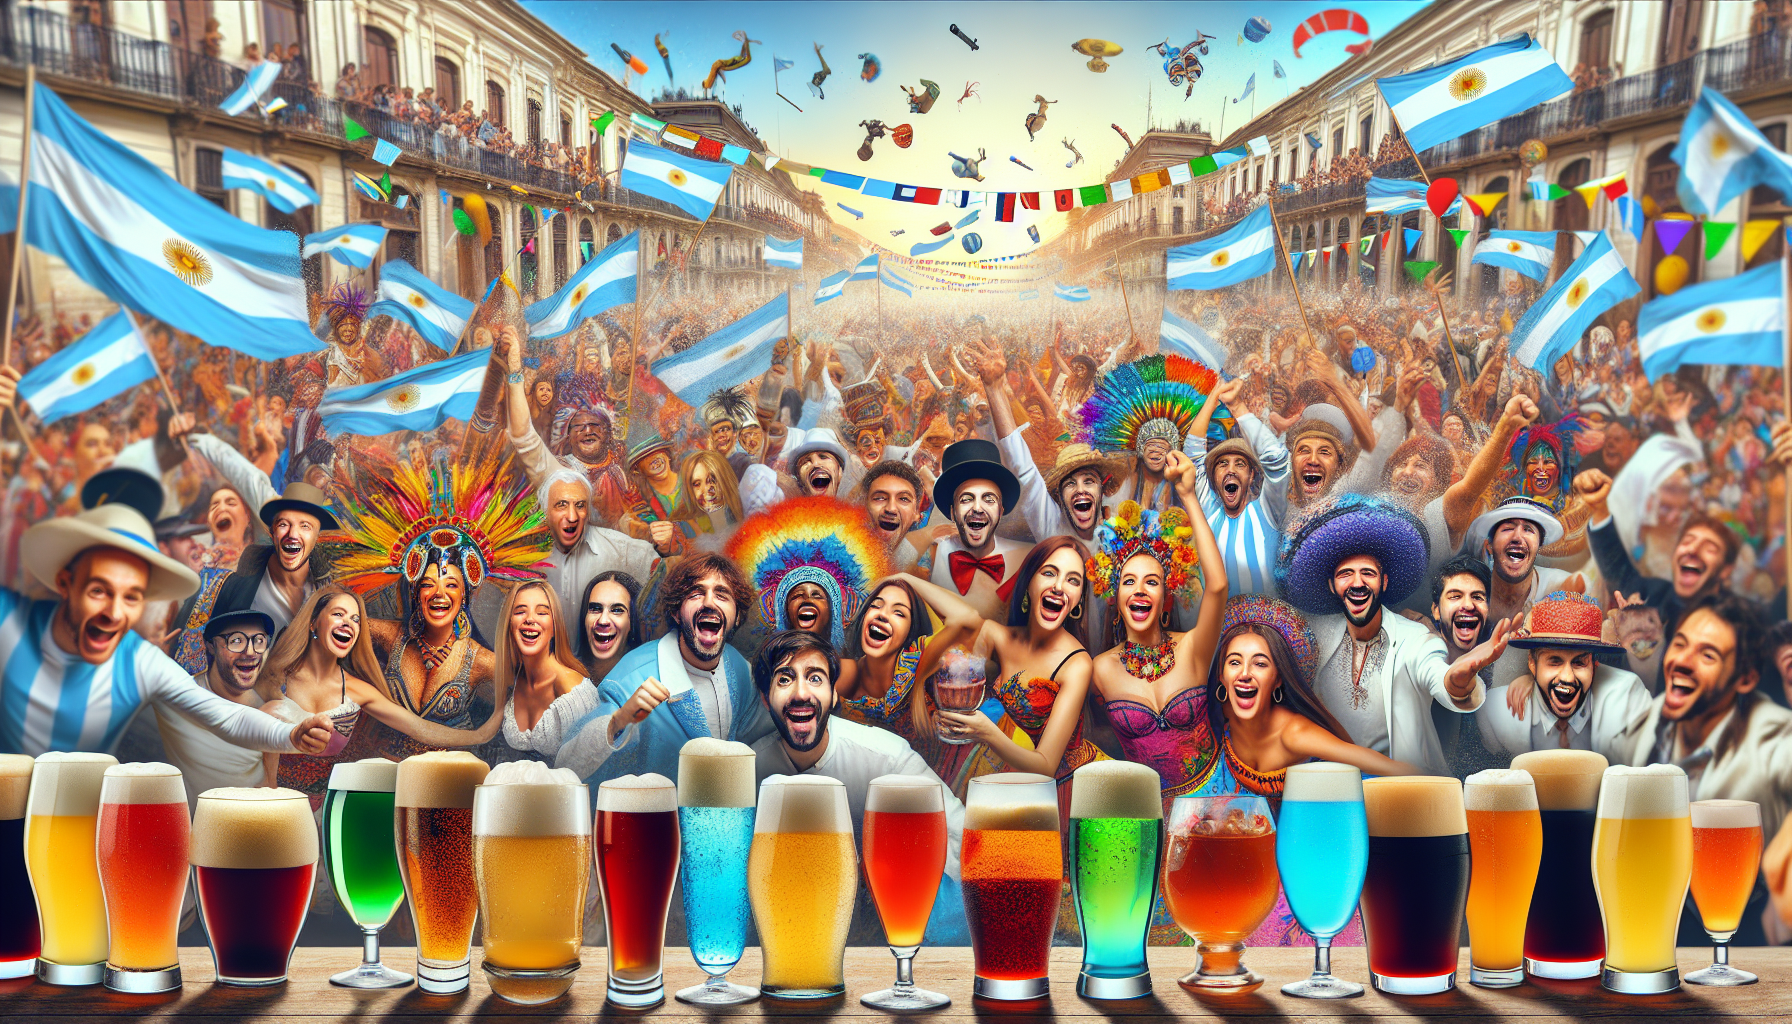 Can You Recommend An Argentinean Drink Thats A Hit At Celebrations?